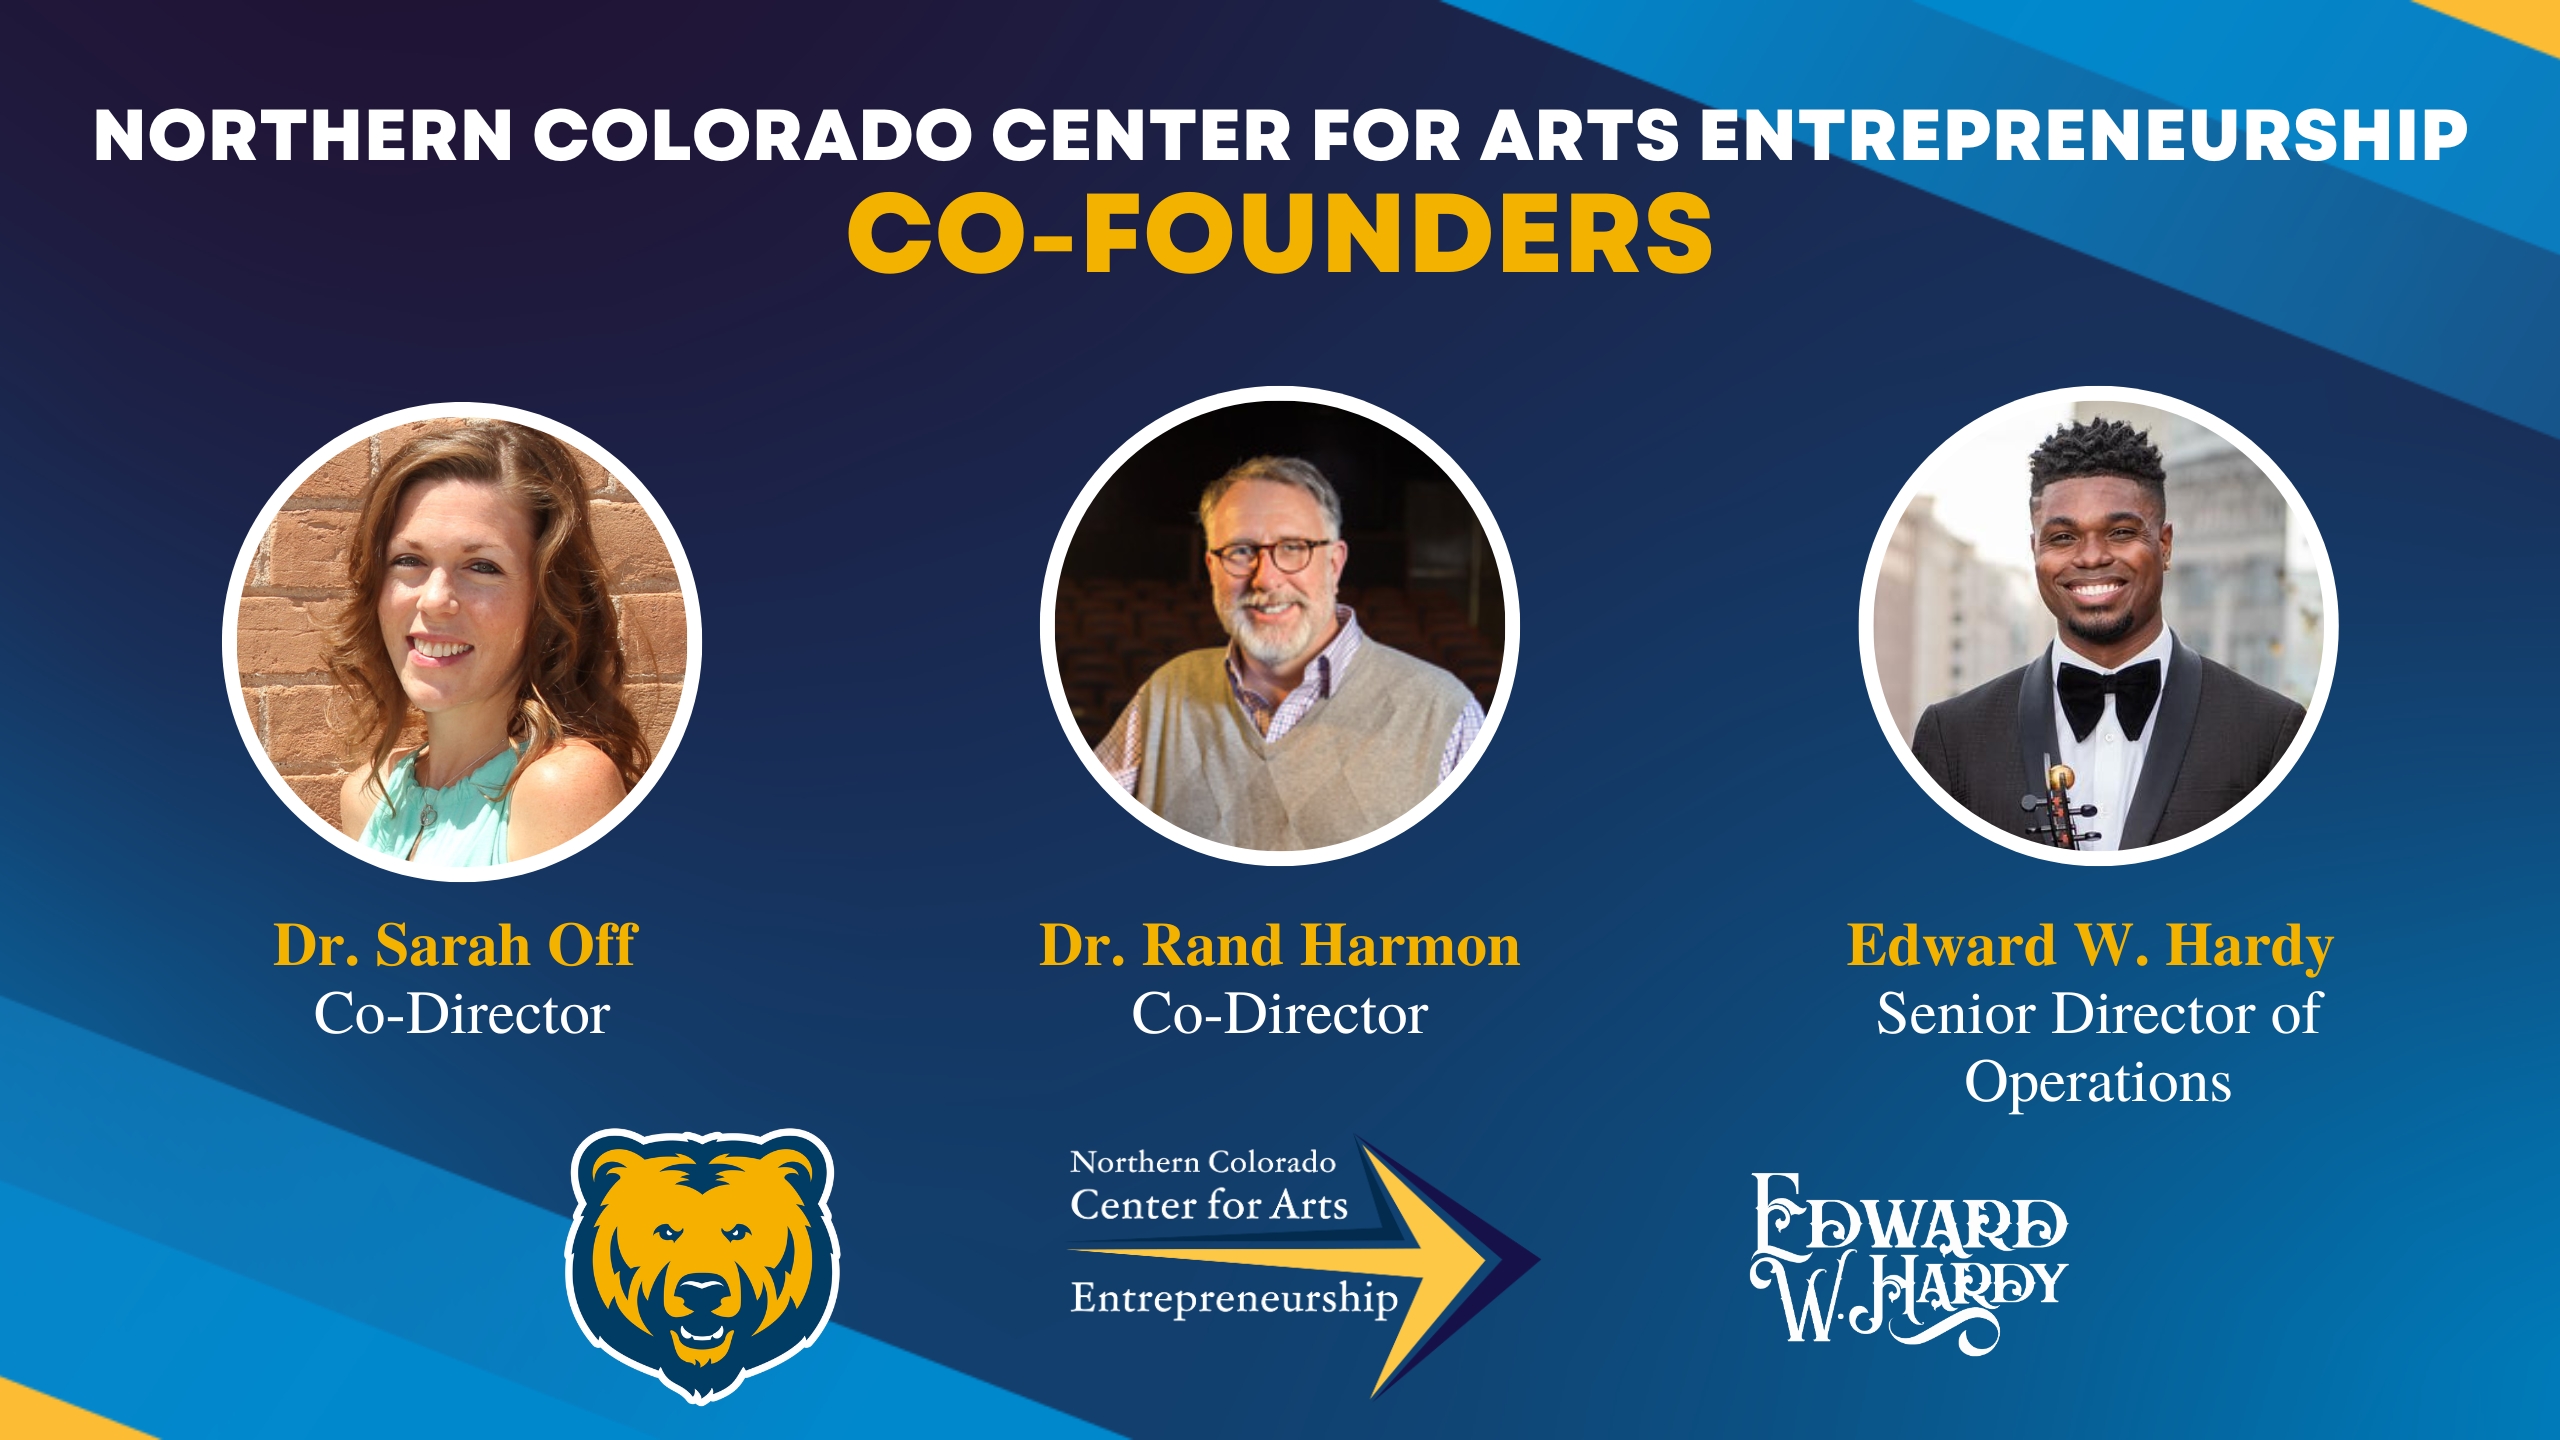 Co-Founders Edward W. Hardy & Drs. Sarah Off and Rand Harmon of the Northern Colorado Center for Arts Entrepreneurship (University of Northern Colorado: College of Performing and Visual Arts).